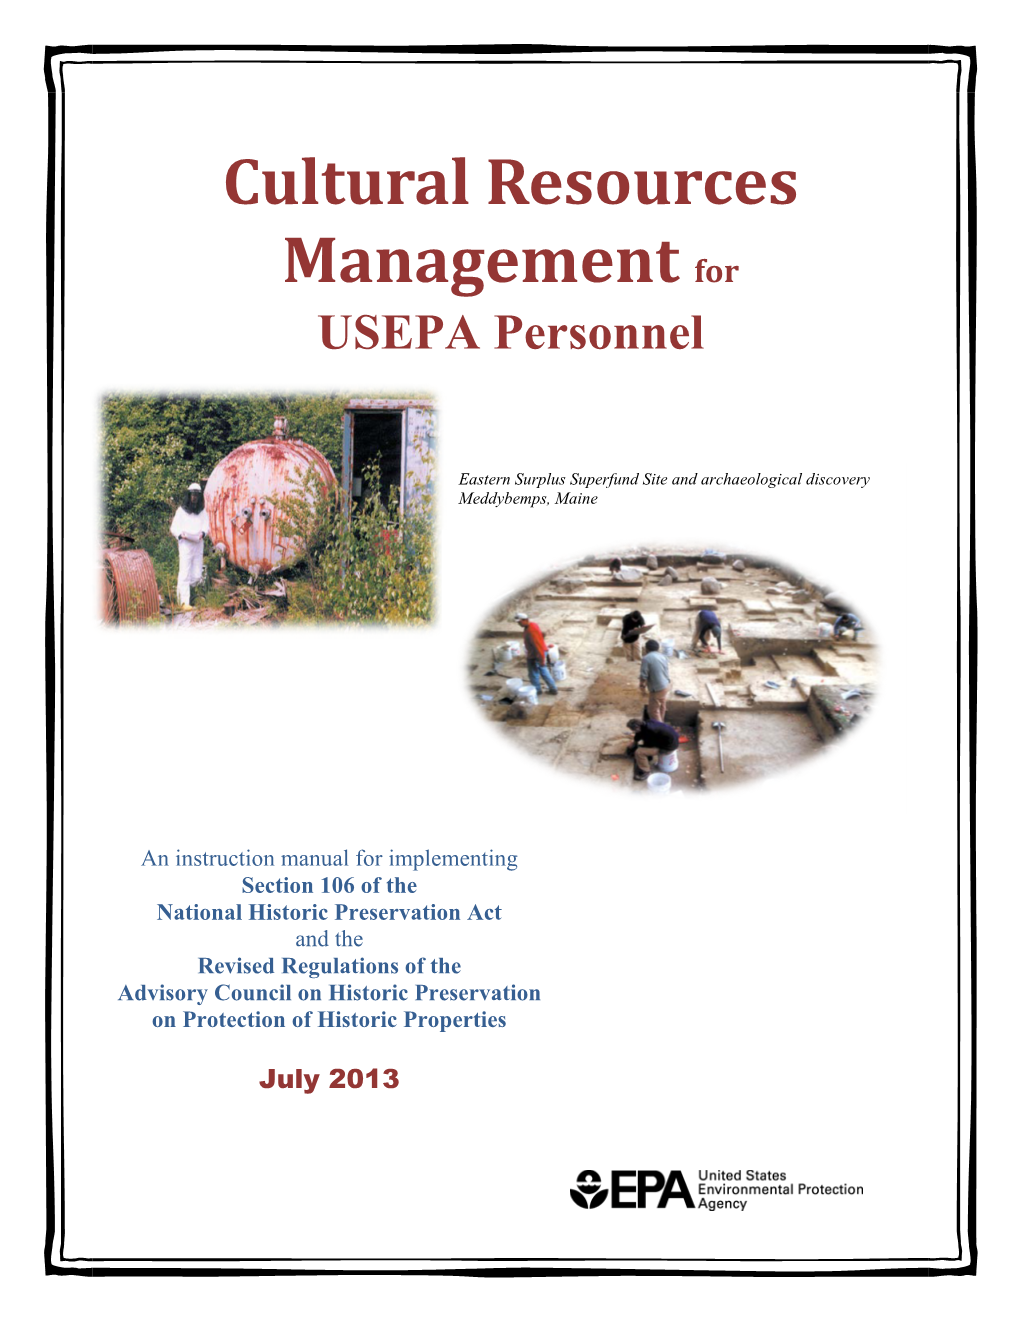 Cultural Resources Management for USEPA Personnel